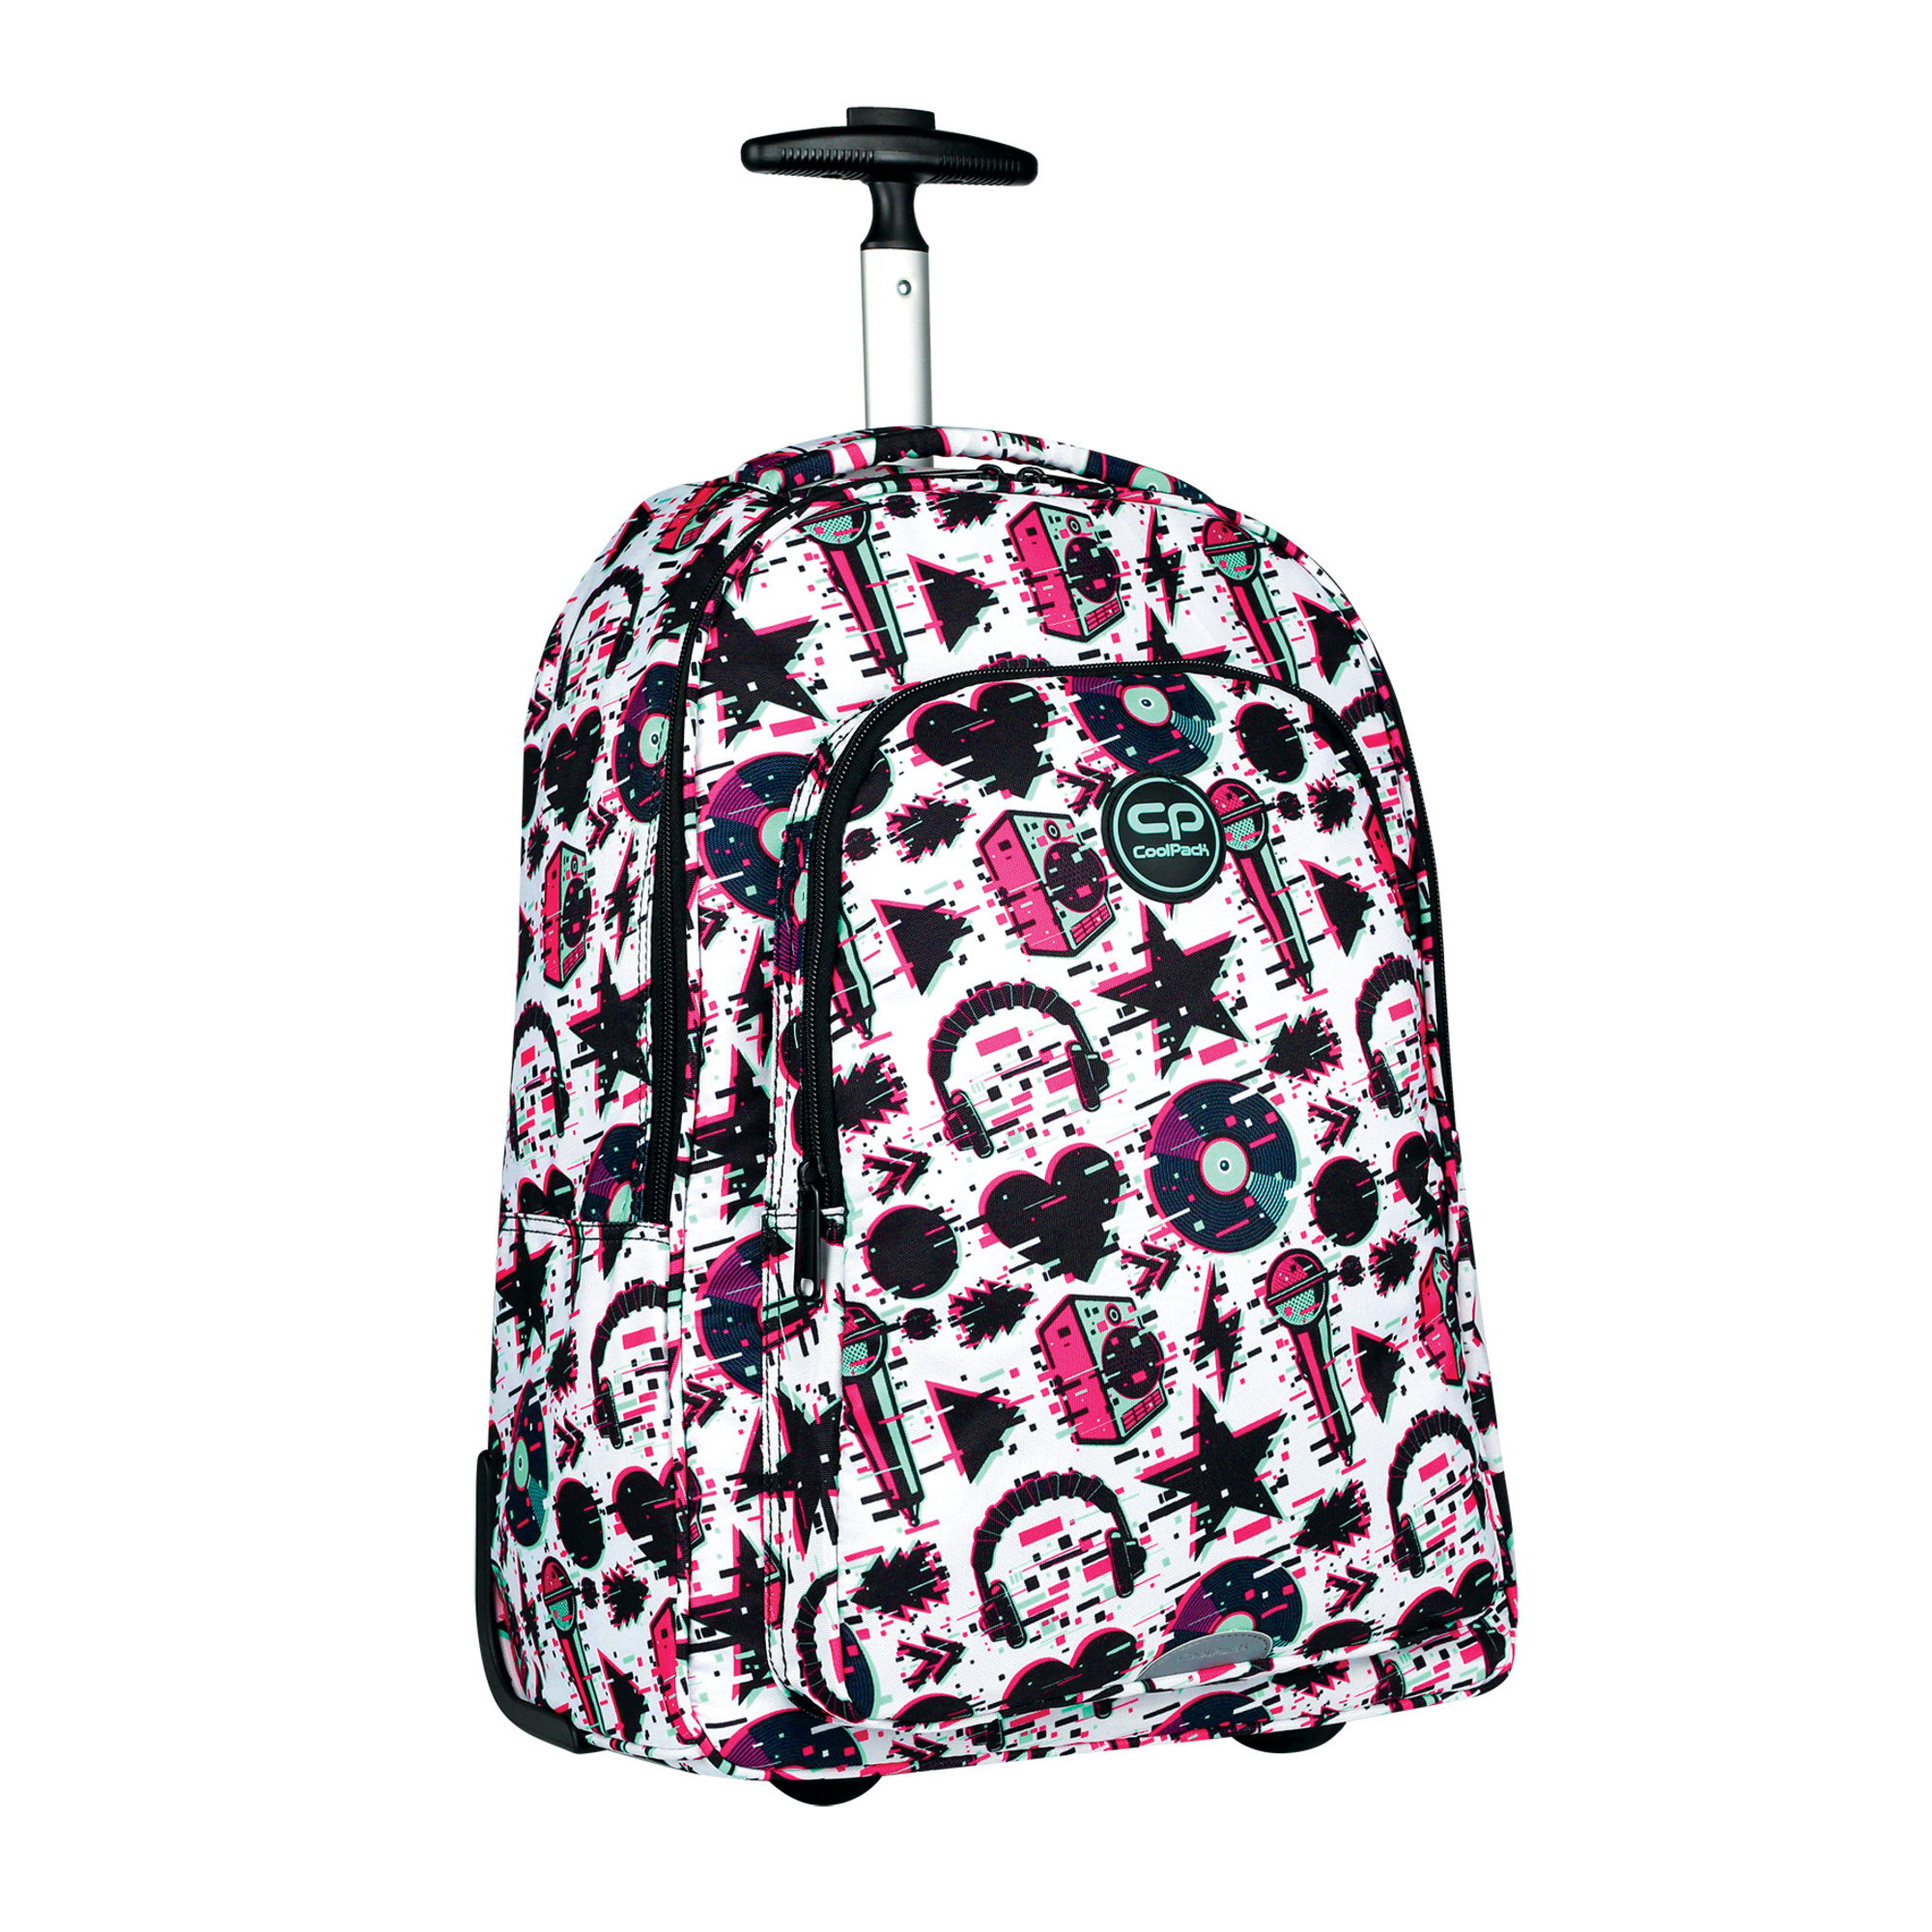 Trolley scuola coolpack transporter music forever: comparto grande, waterproof, antishock - 44x33x26 cm - Coolpack